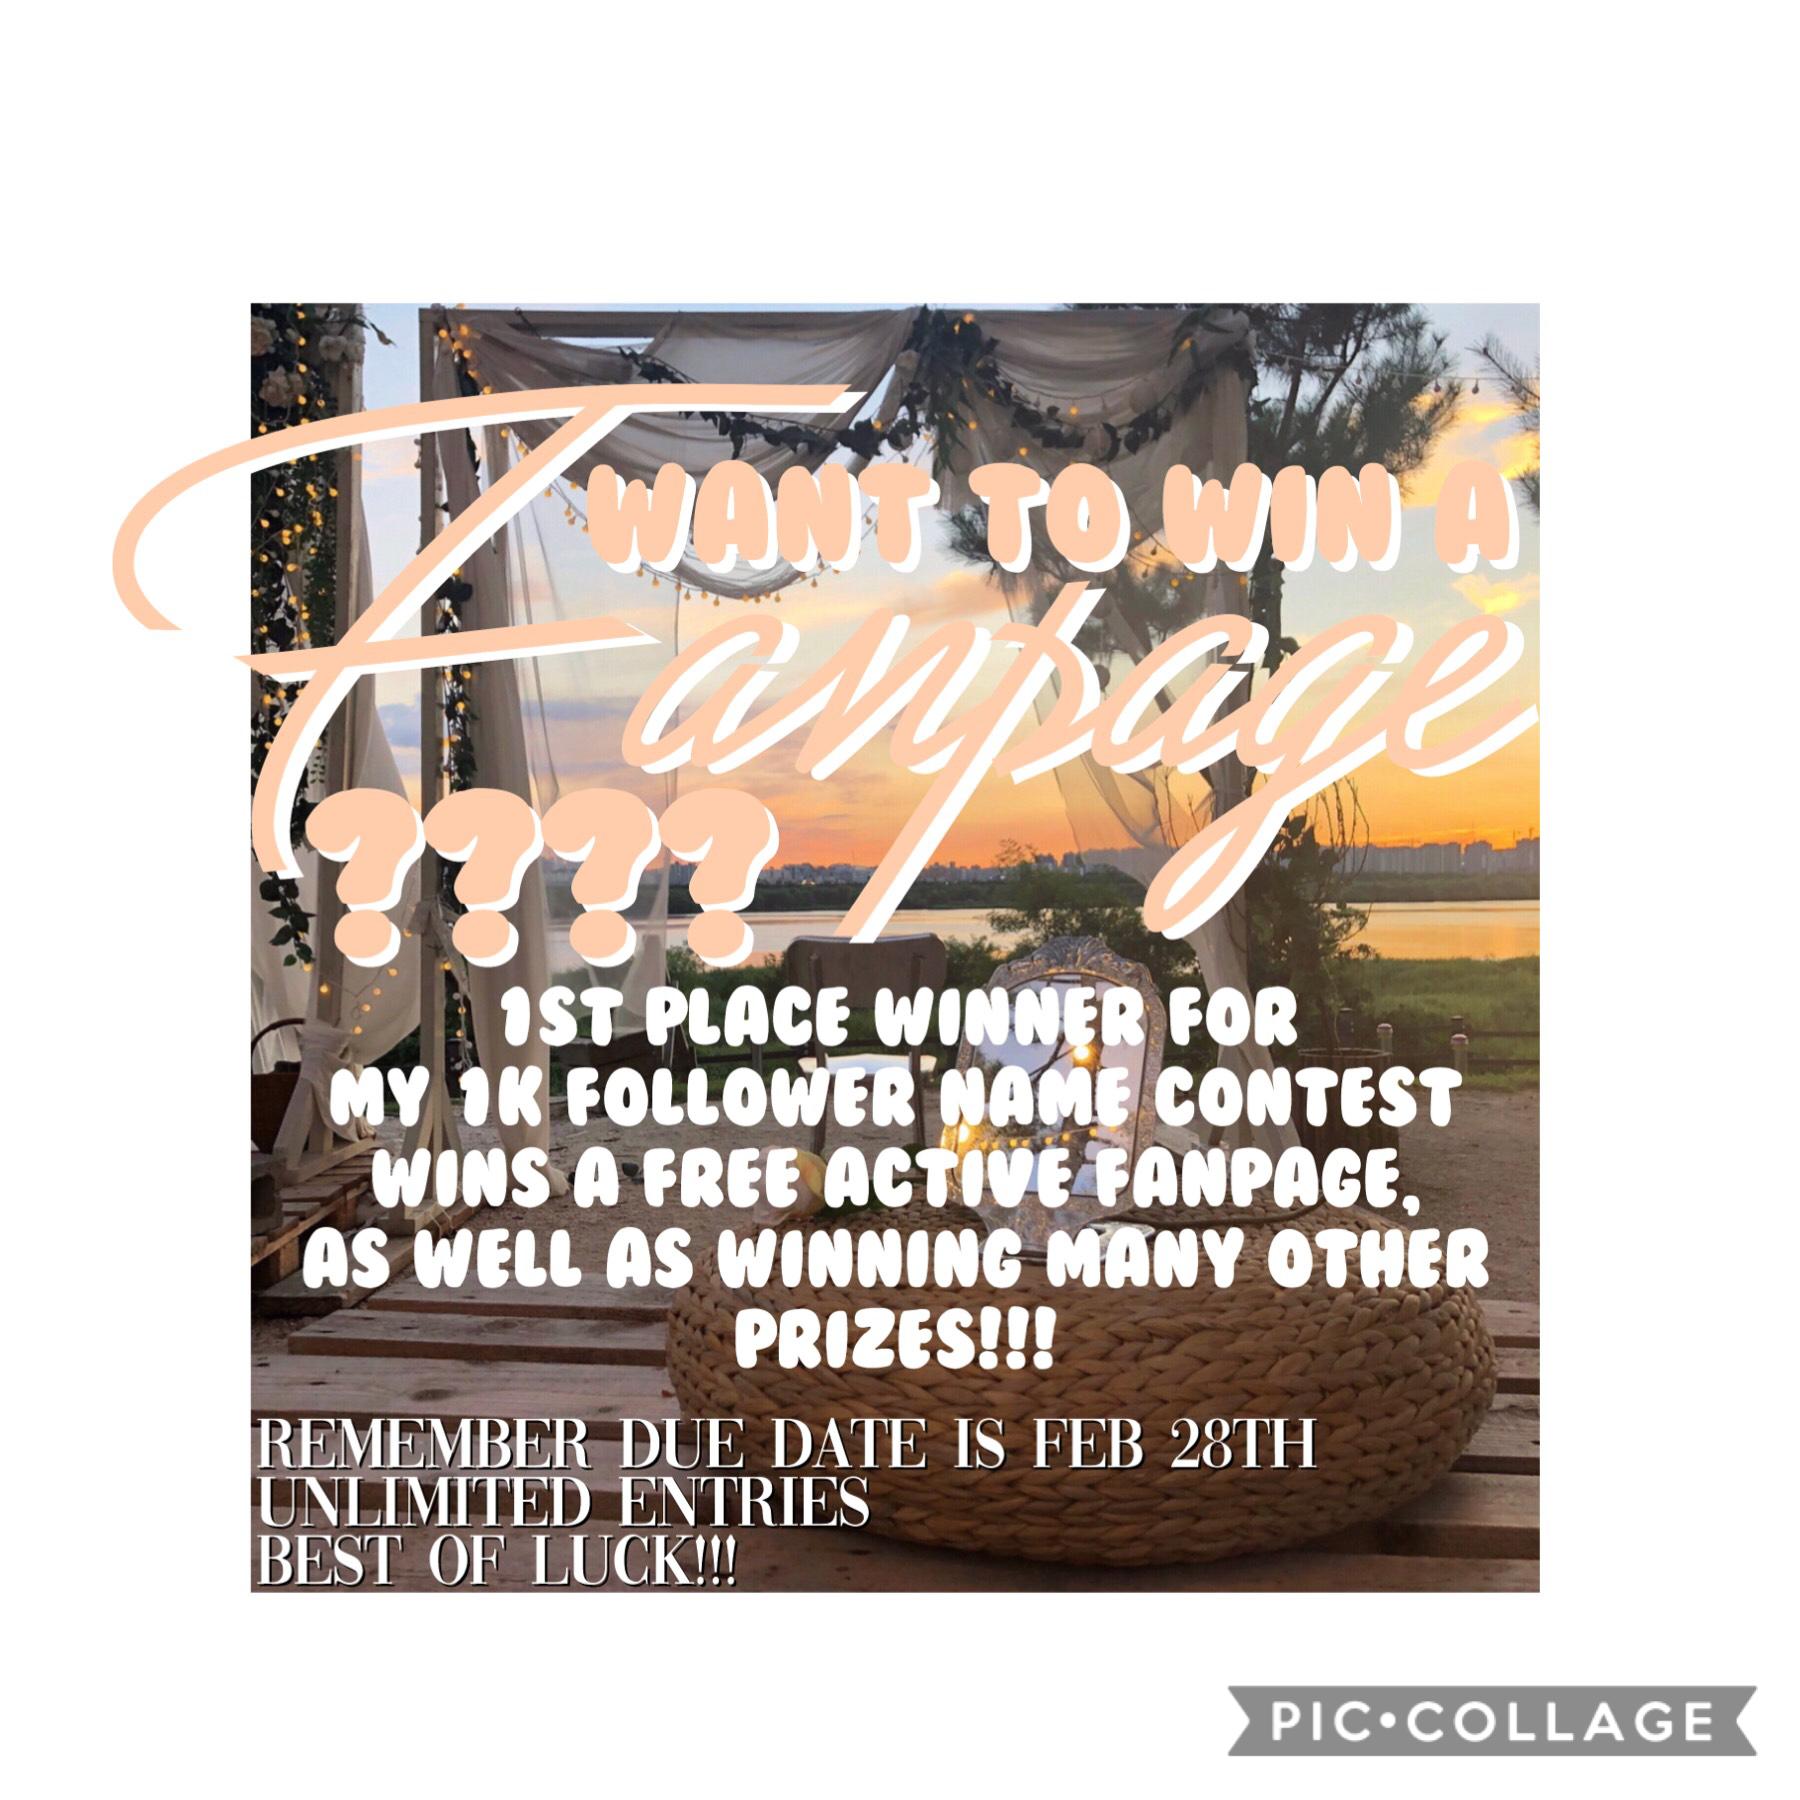 [TAP] IMPORTANT [TAP]

you all are such beautiful humans i could t pick who to make a fanpage for, so this contest will help me decide!

enter as many name suggestions as you’d like on my contest post 

DUE FEBRUARY 28TH 2019